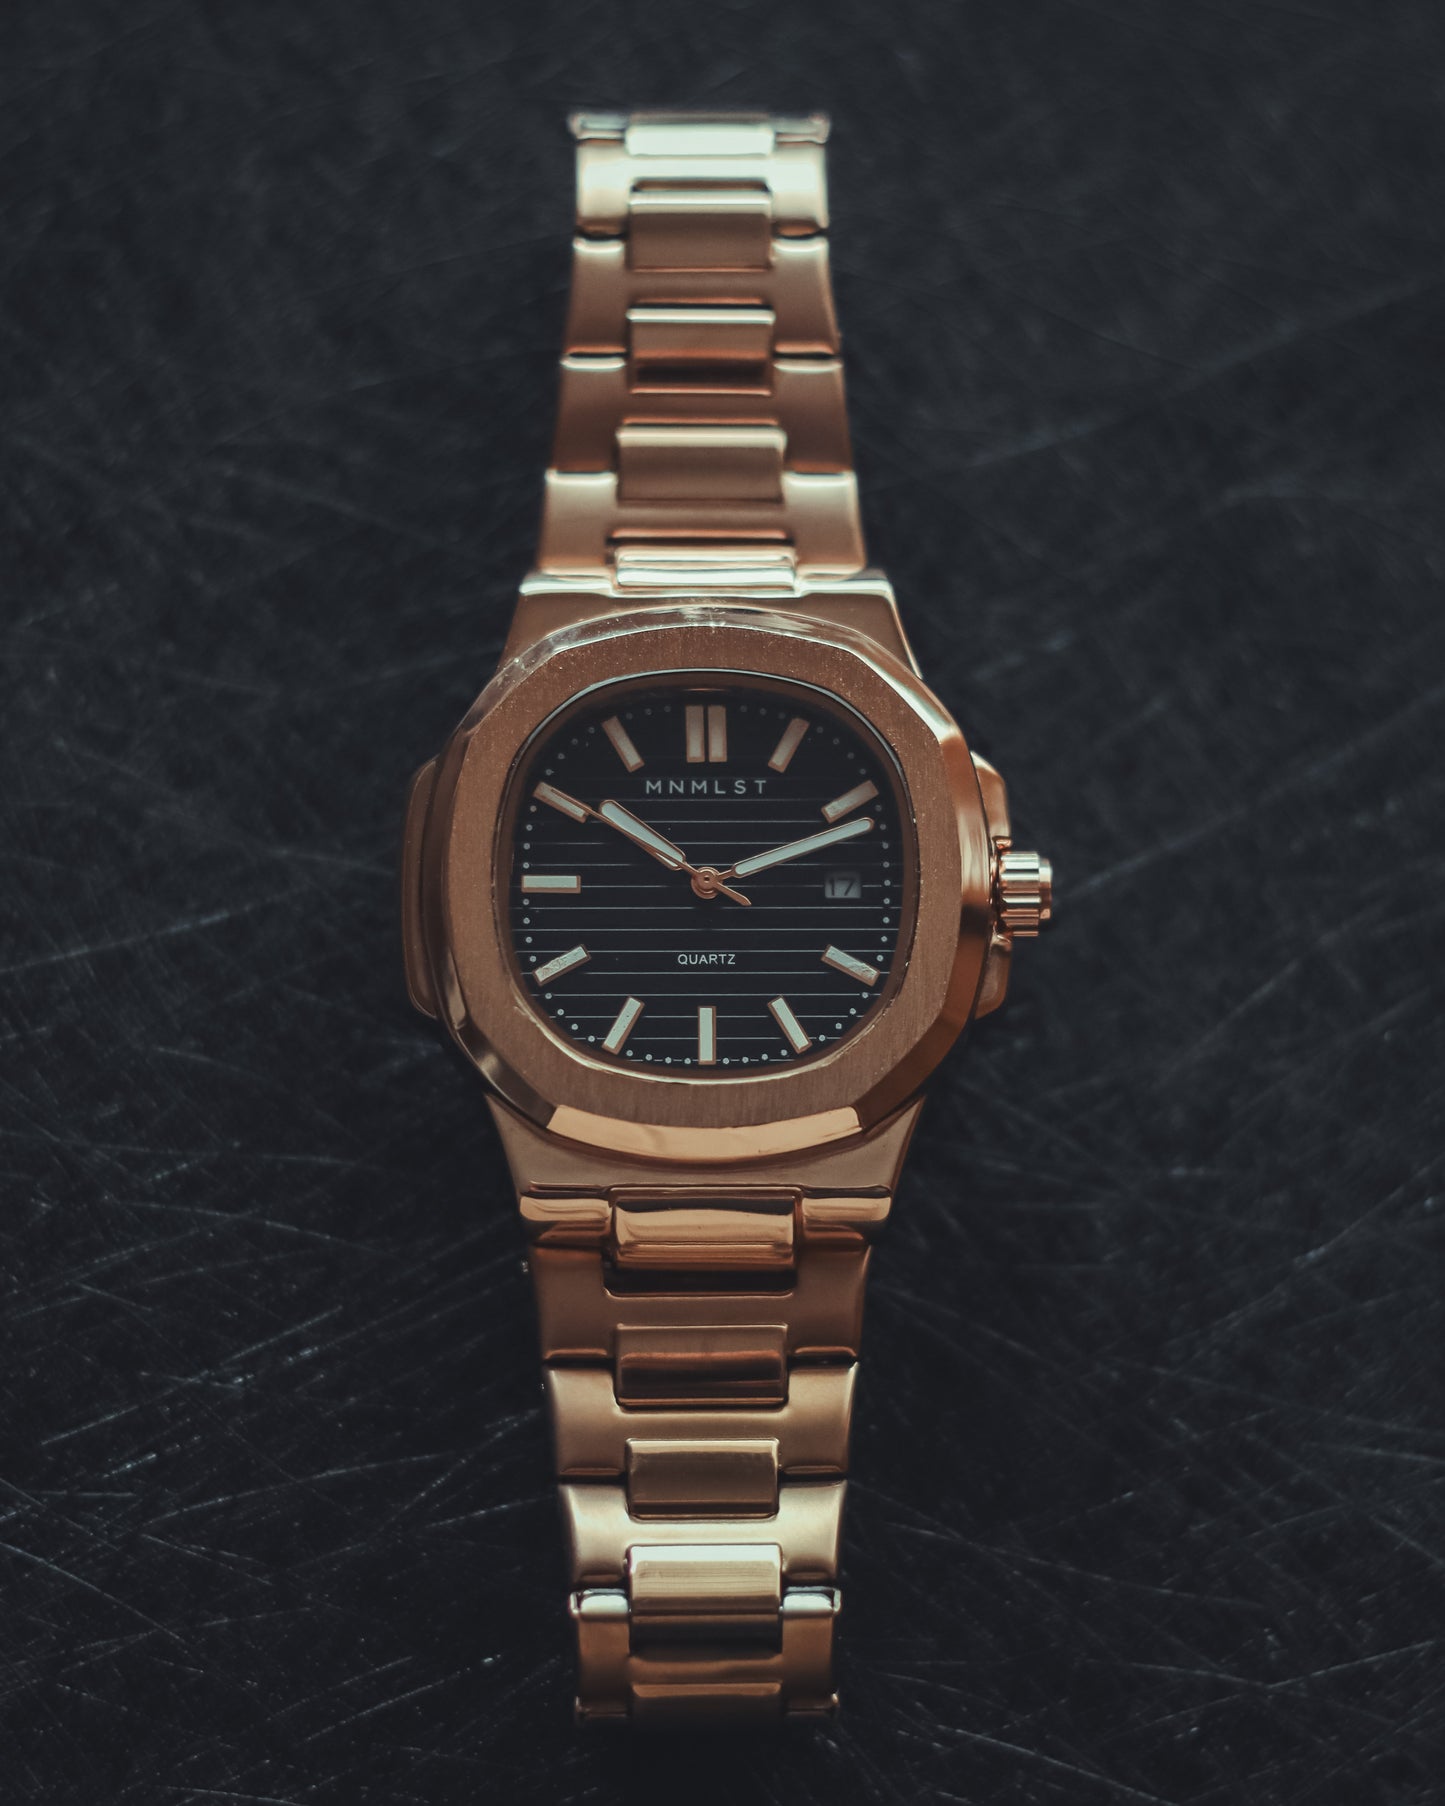 Odyssey (Rose gold and Black)